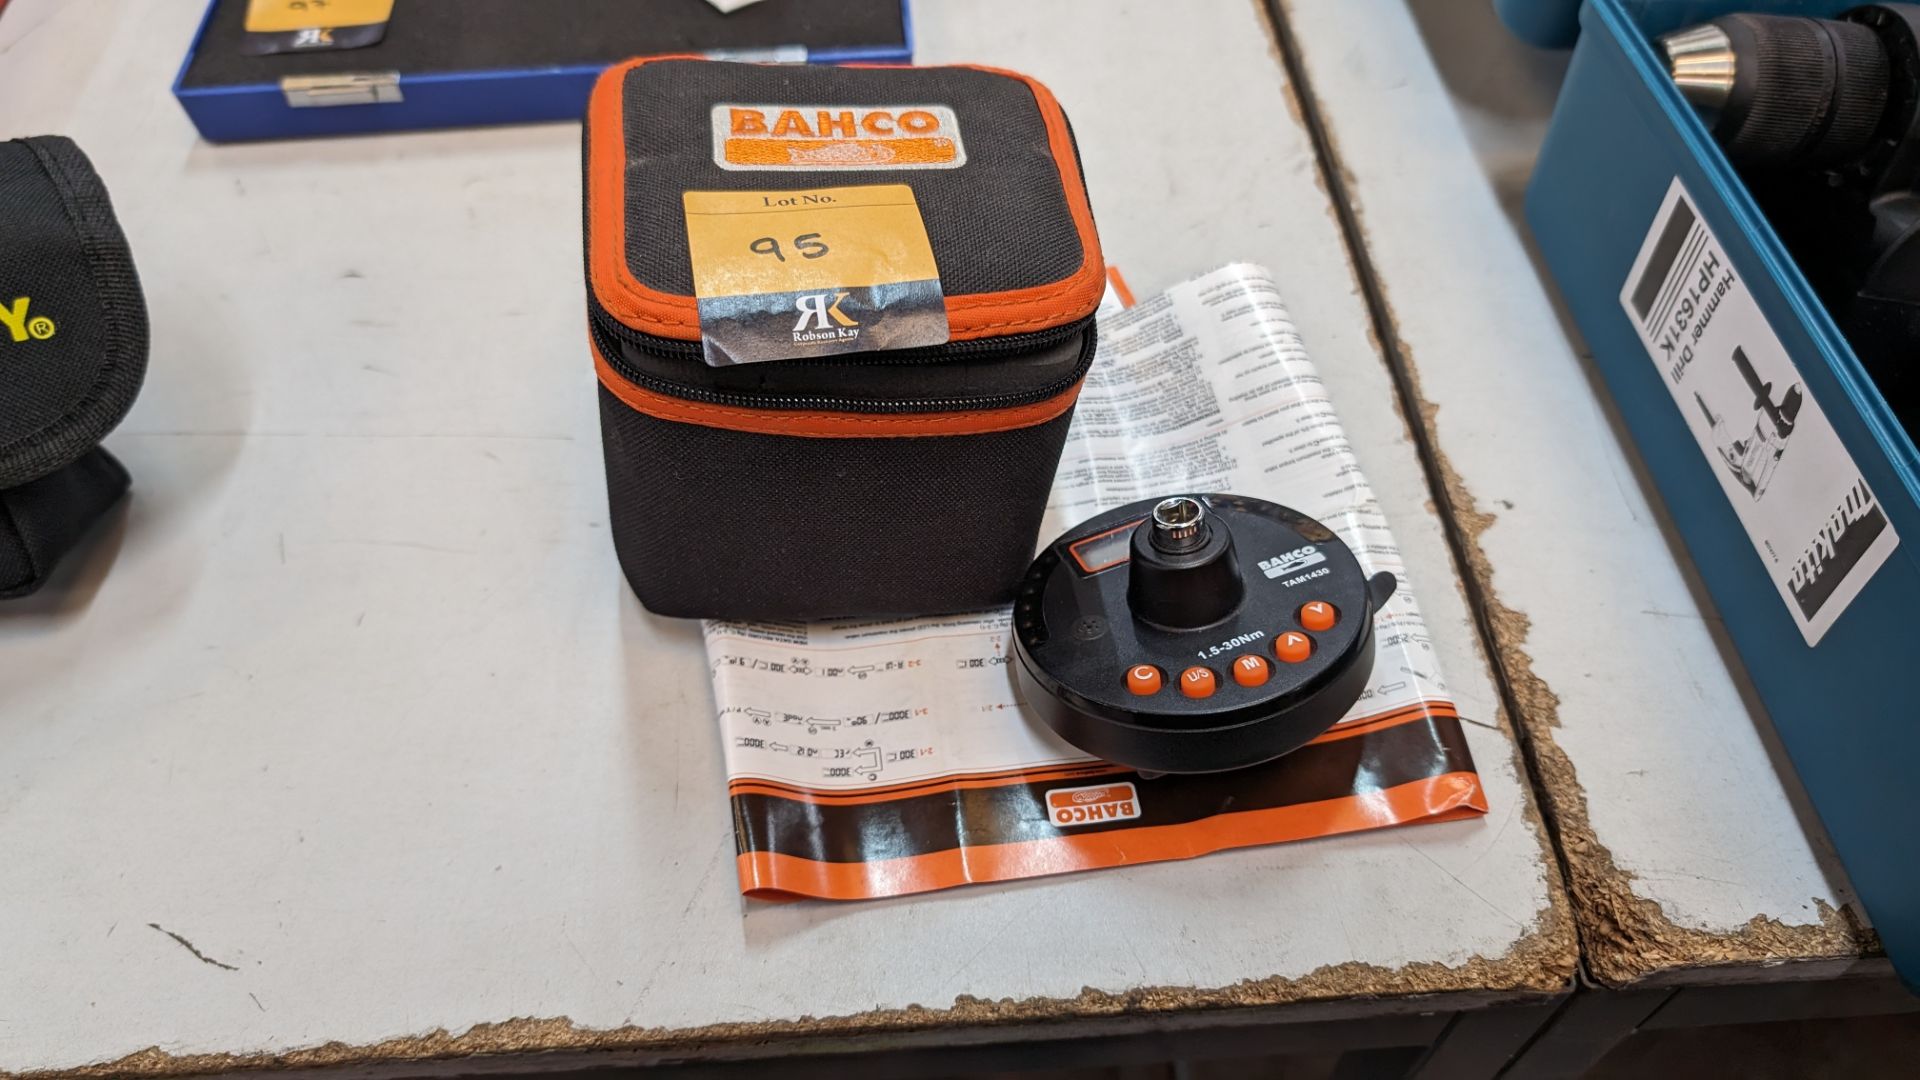 Bahco model TAM1430 electronic torque/angle measuring adaptor in case - Image 2 of 8